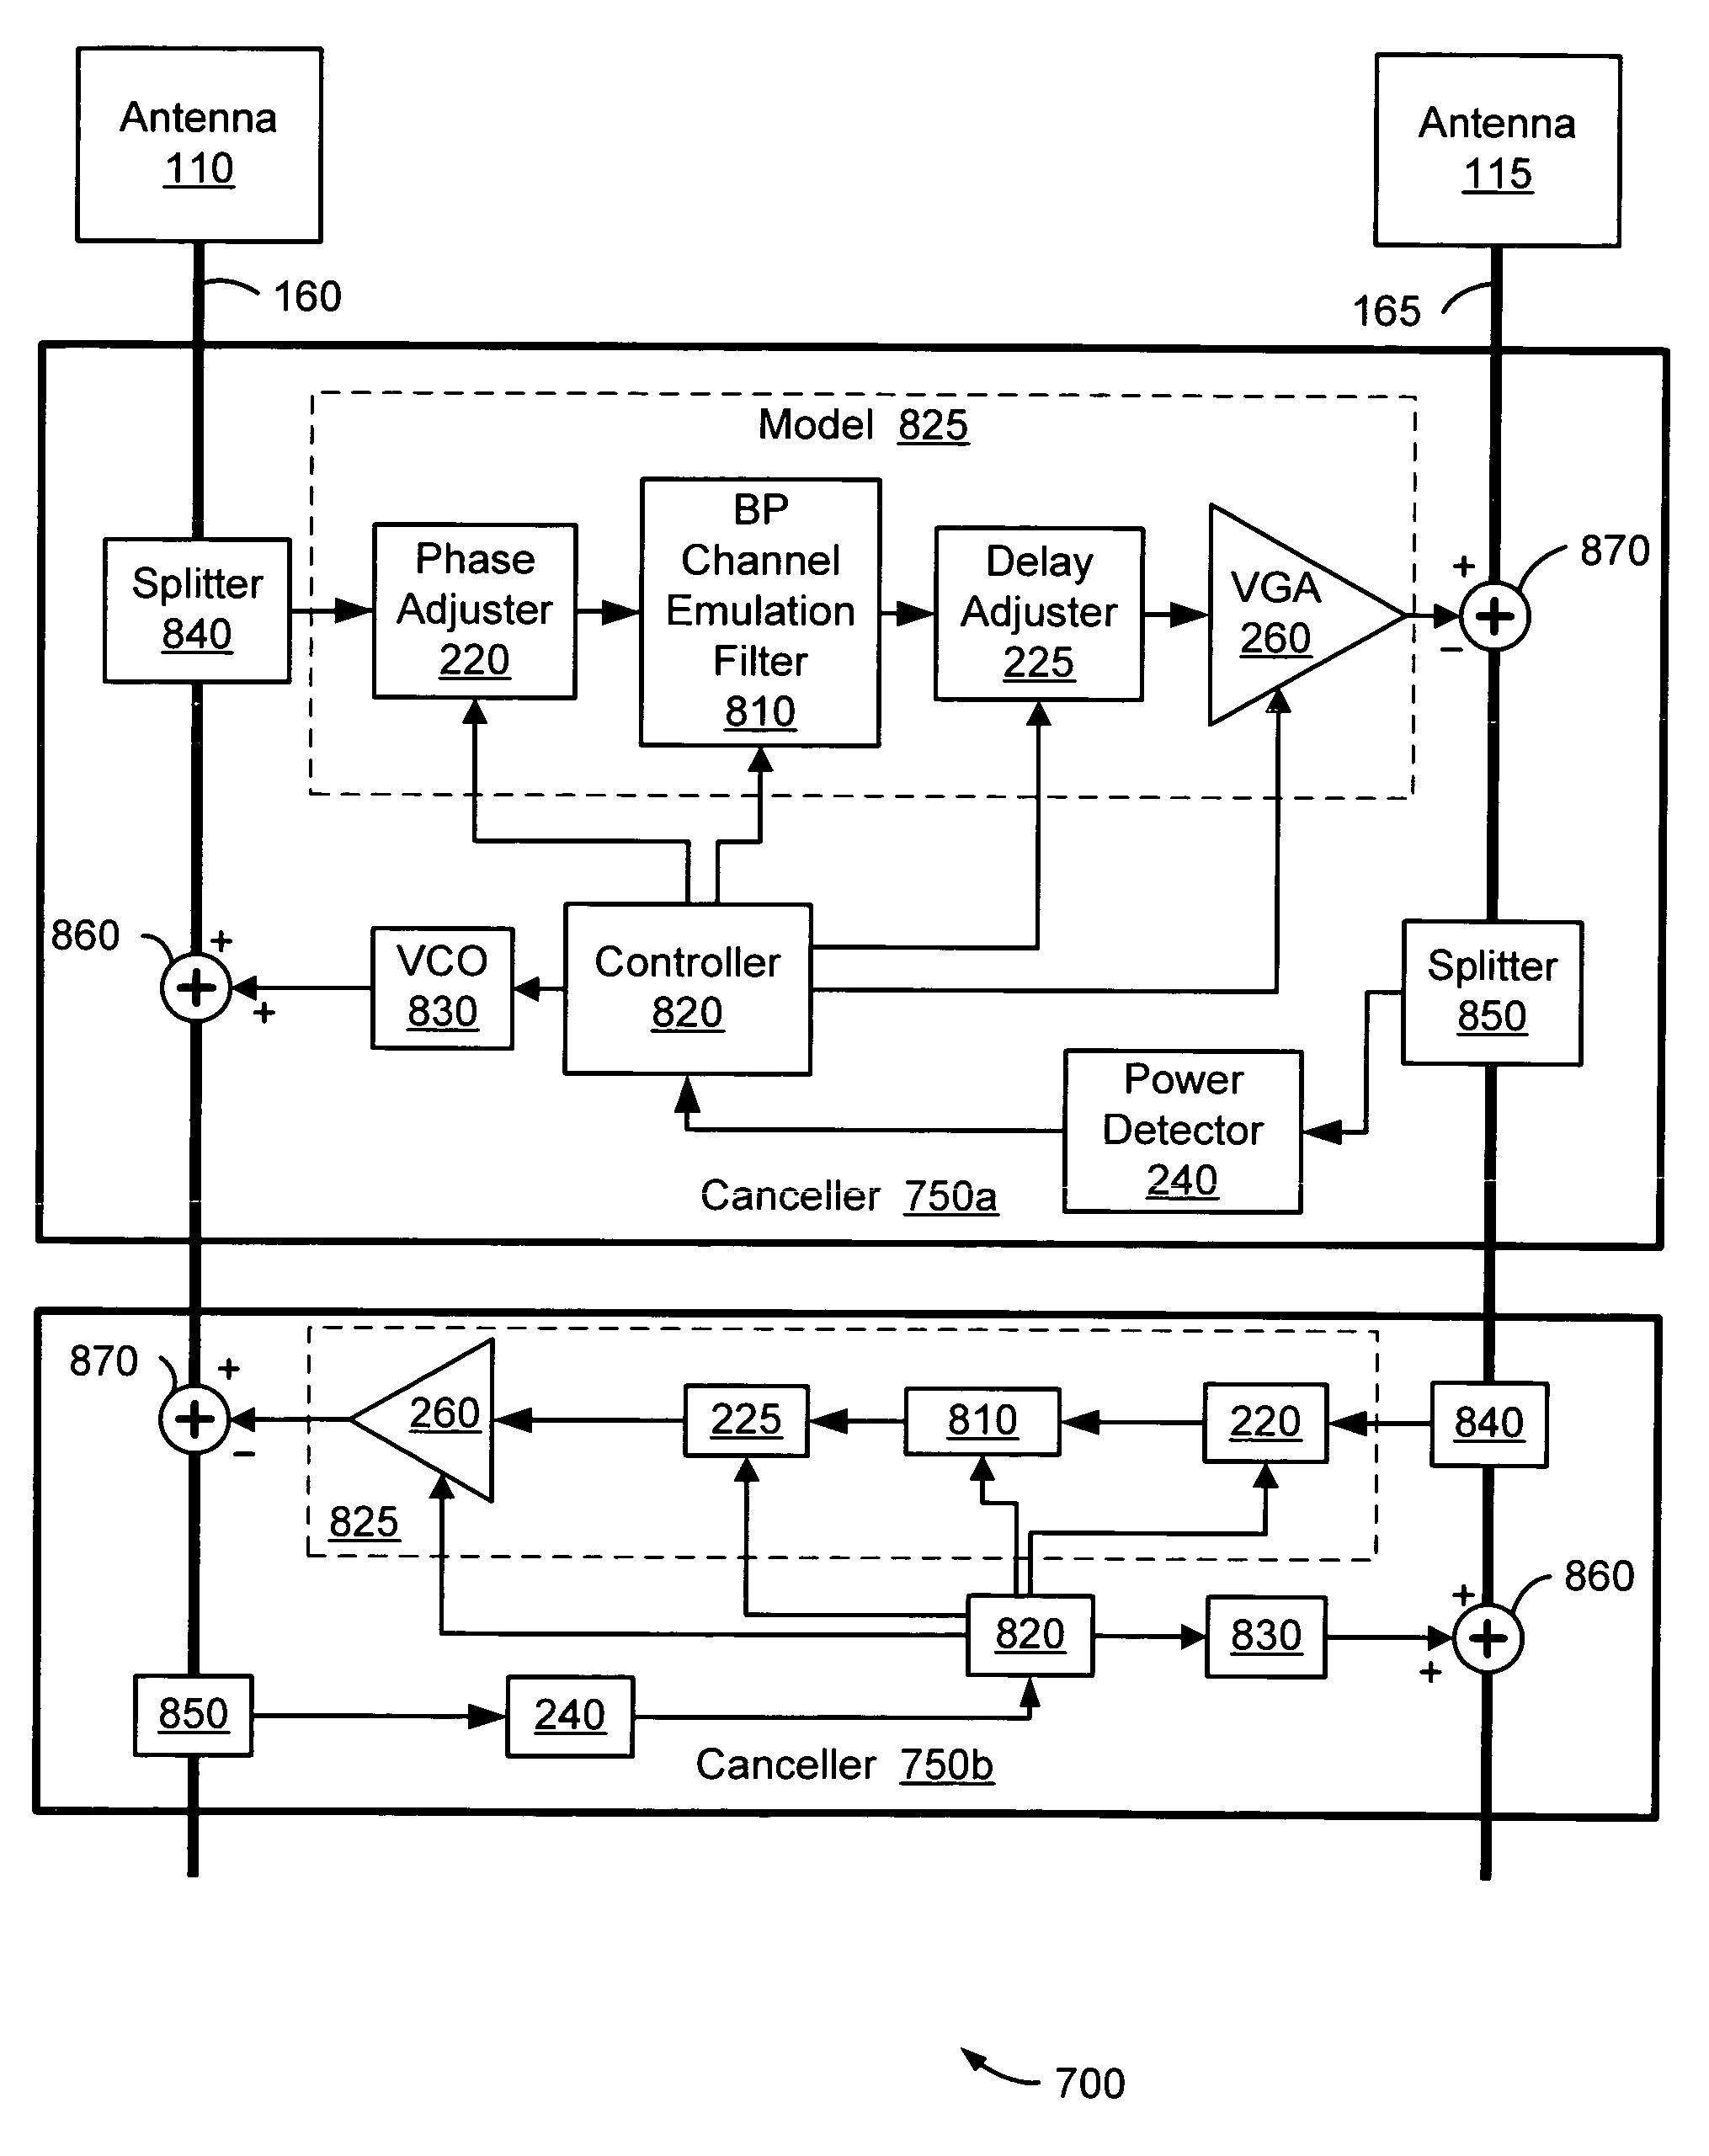 Method and system for antenna interference cancellation